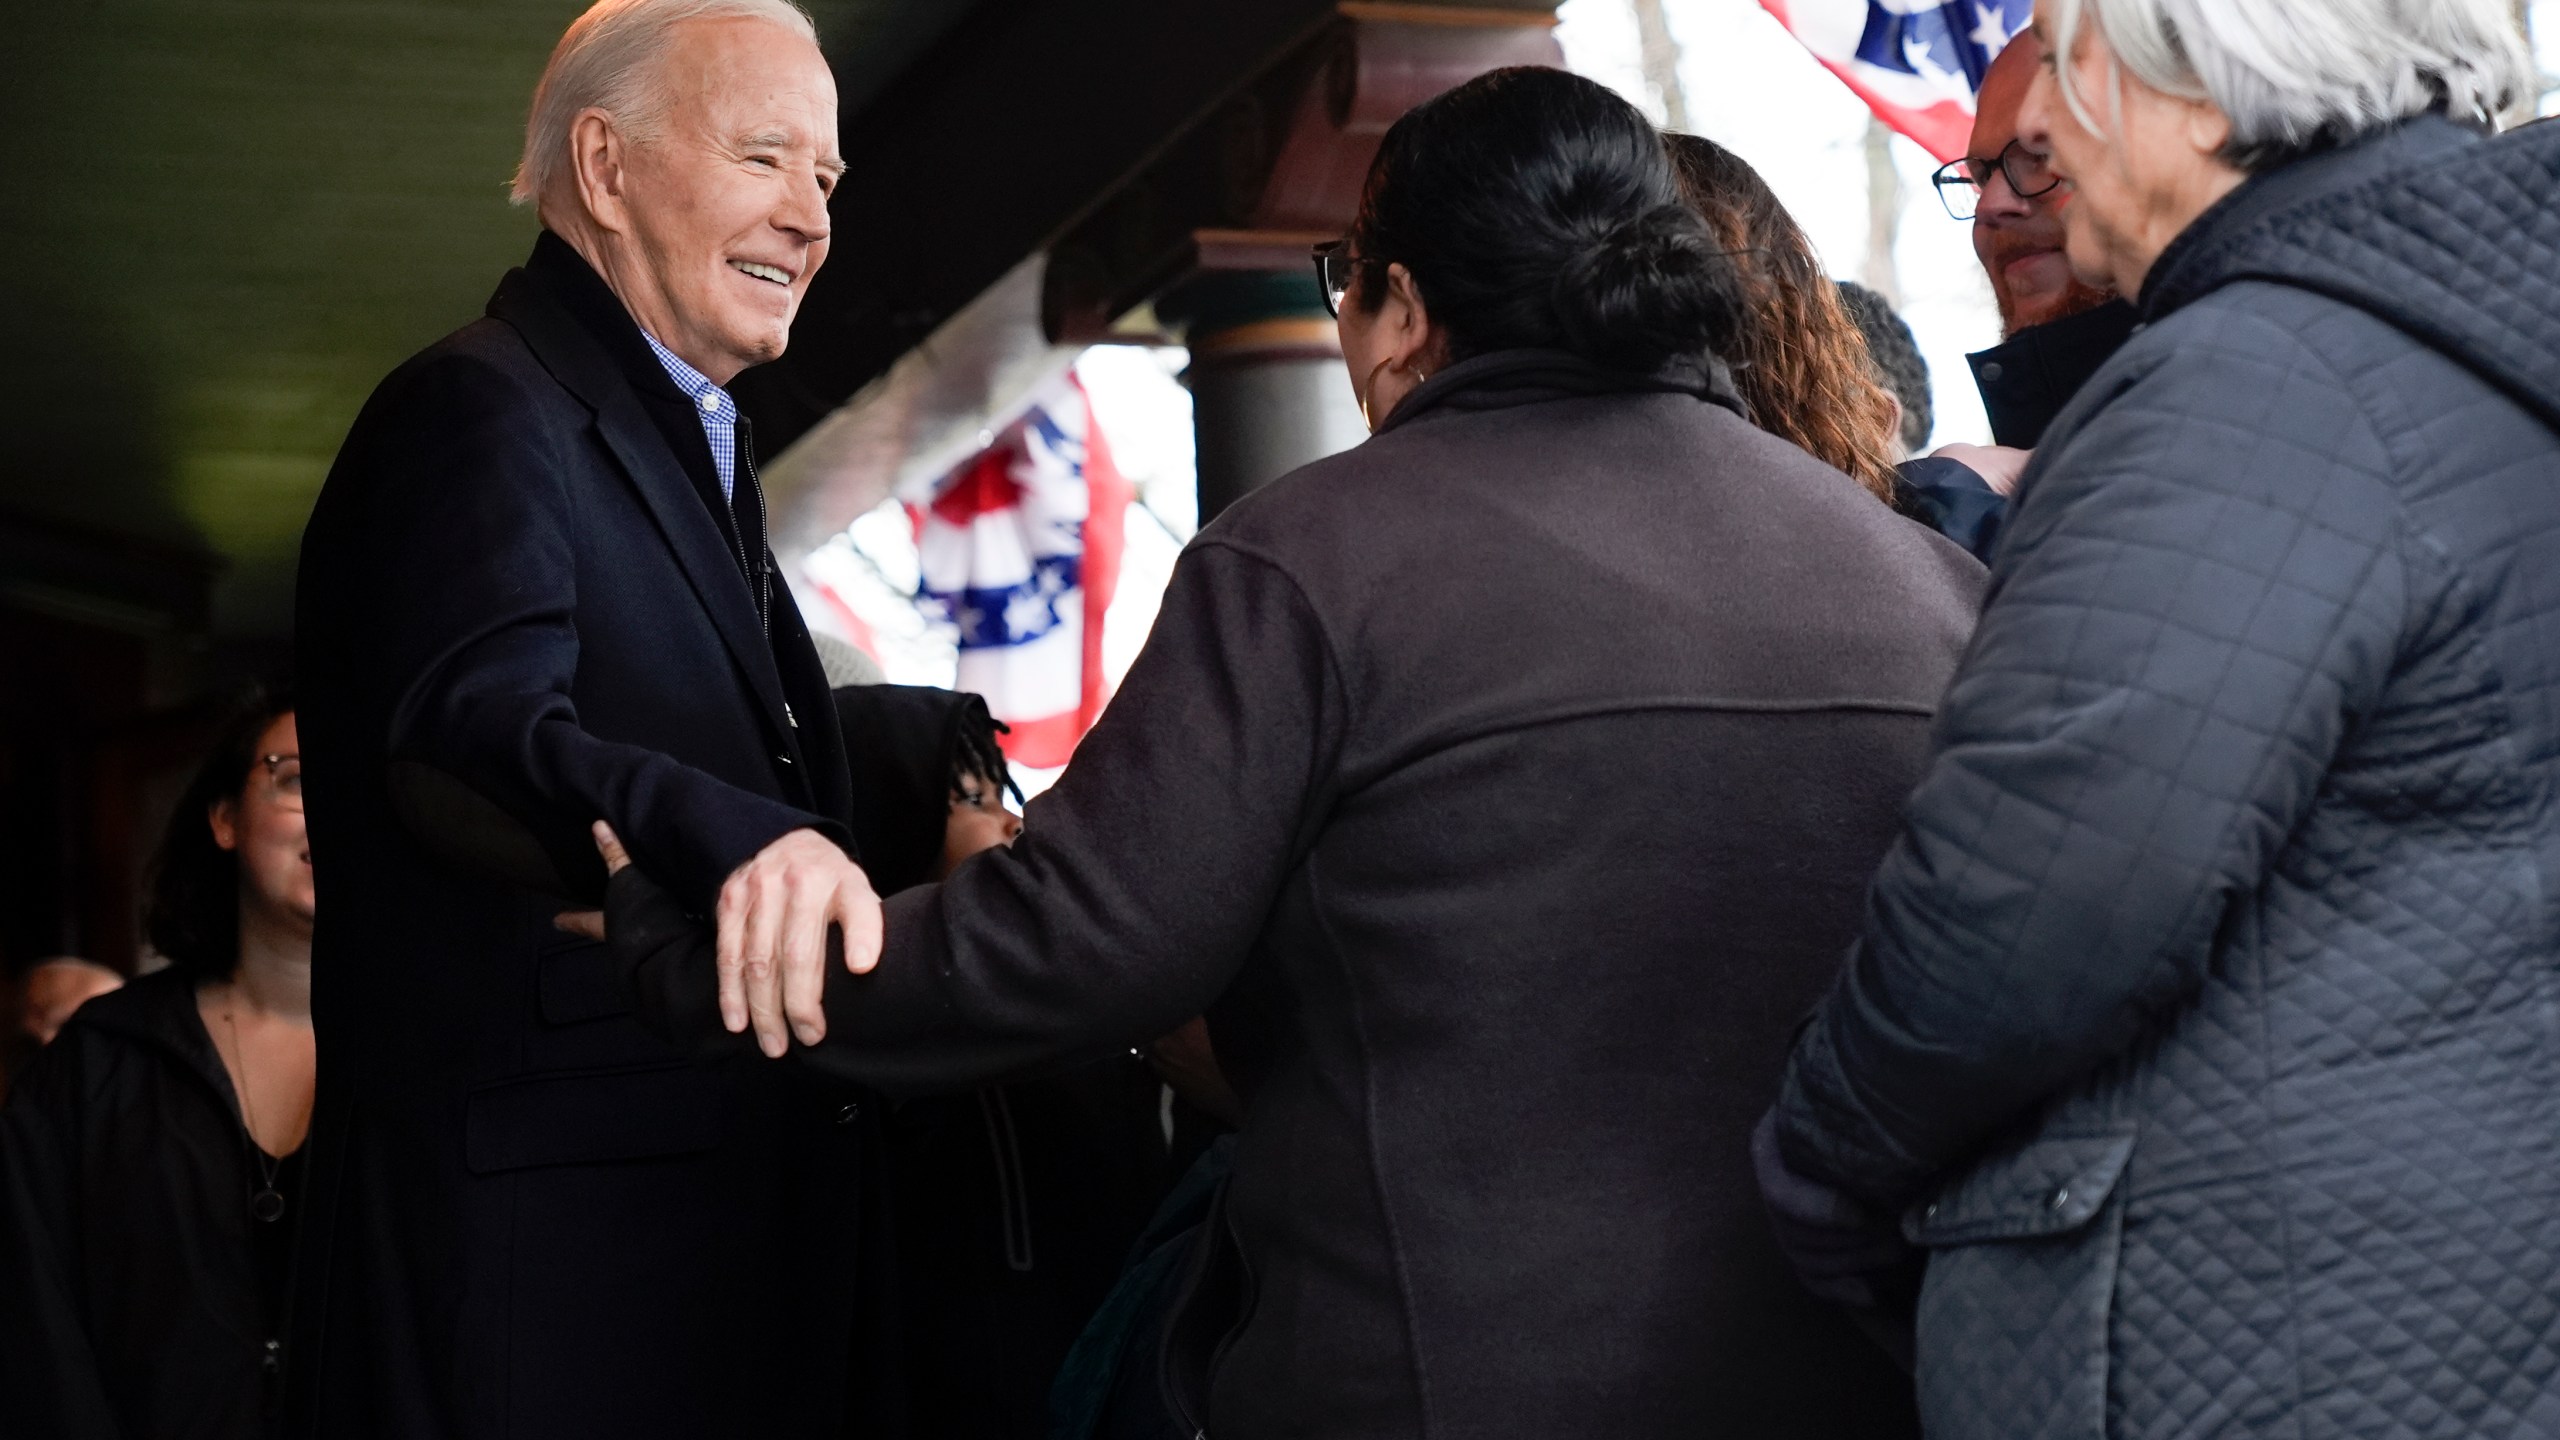 President Joe Biden talks with supporters during a campaign event in Saginaw, Mich., Thursday, March 14, 2024. (AP Photo/Jacquelyn Martin)